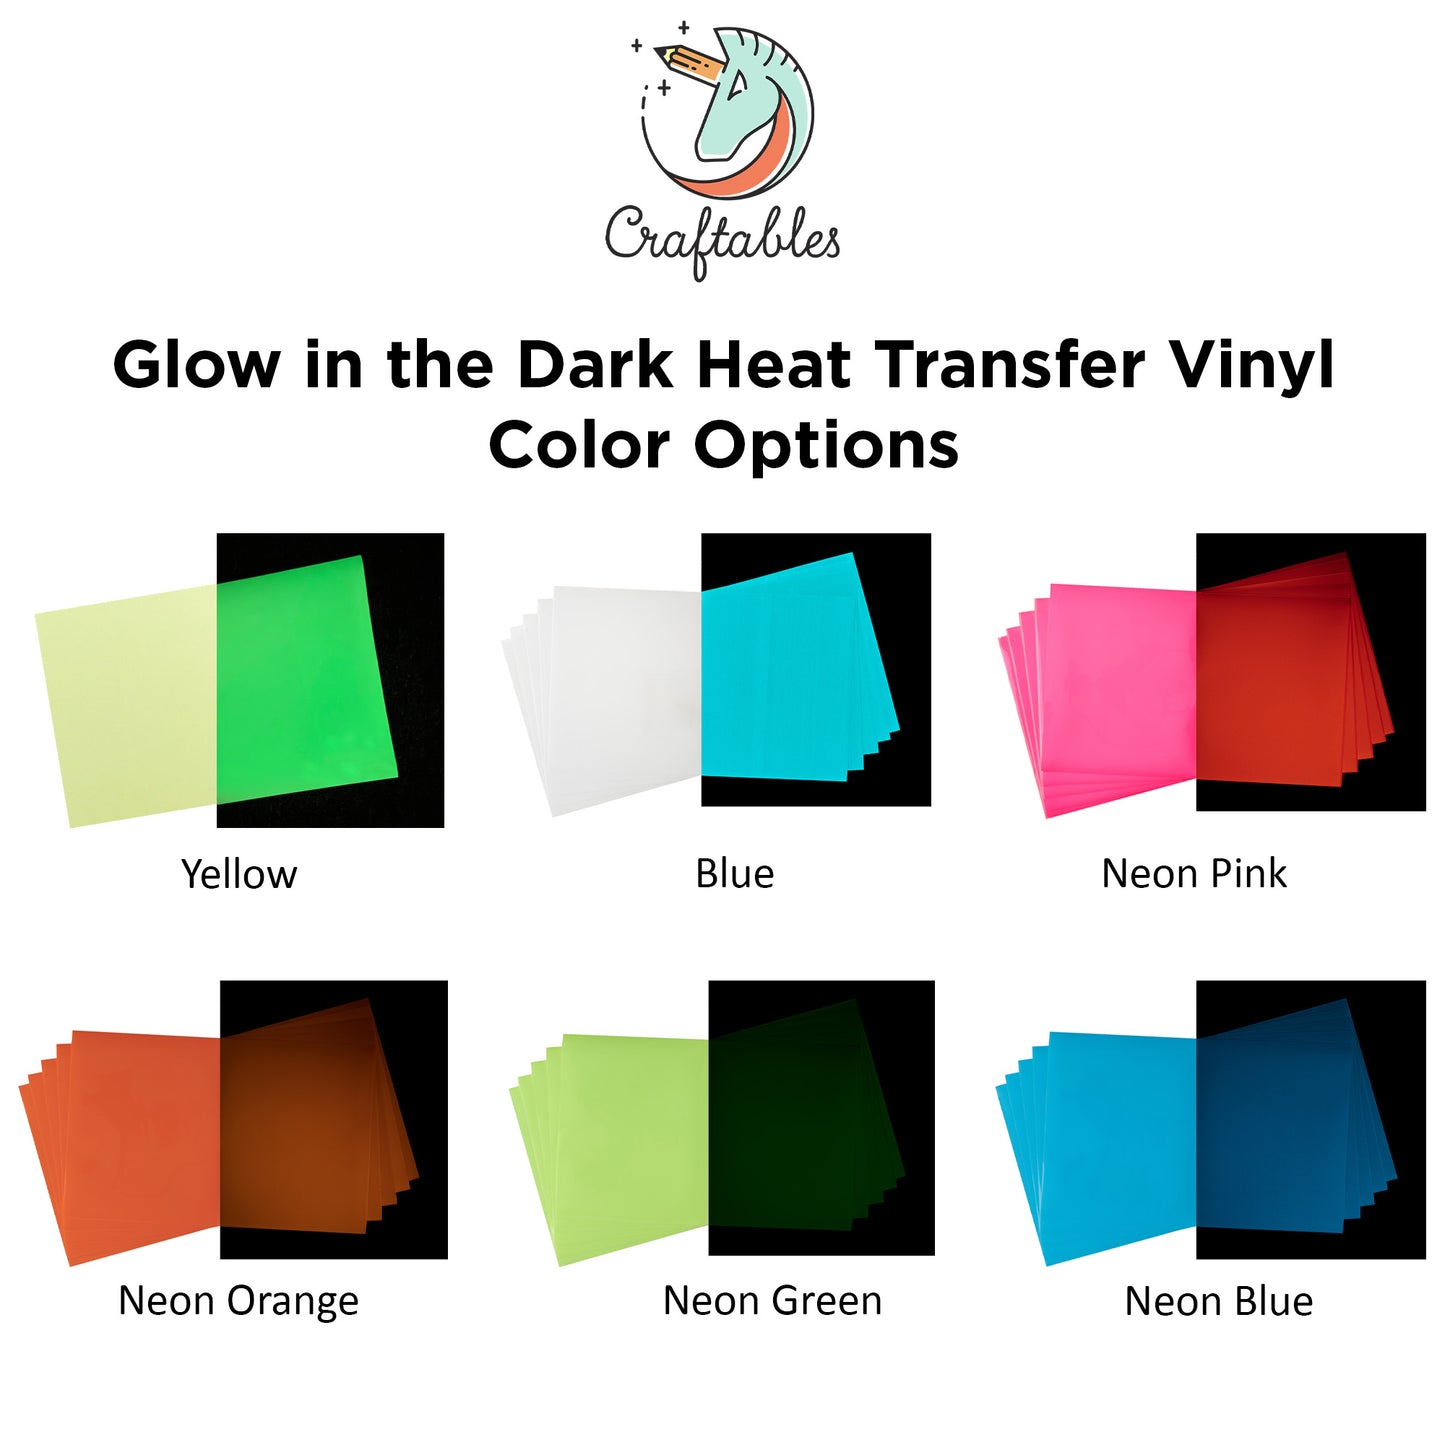 Neon Green Glow in the Dark Heat Transfer Vinyl Sheets By Craftables